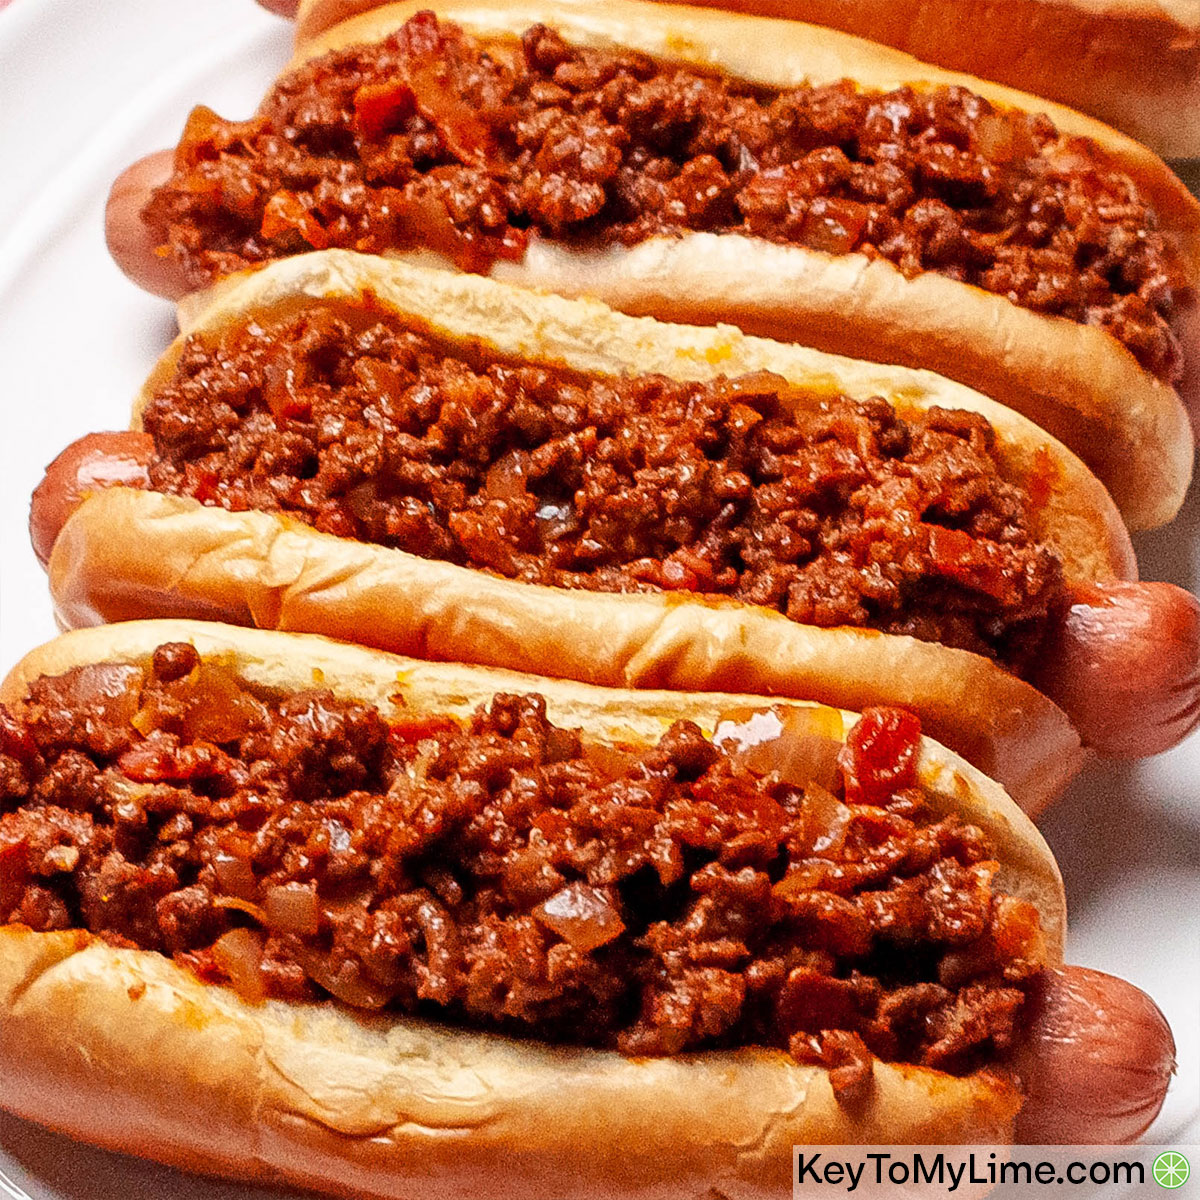 are chili dogs bad for you